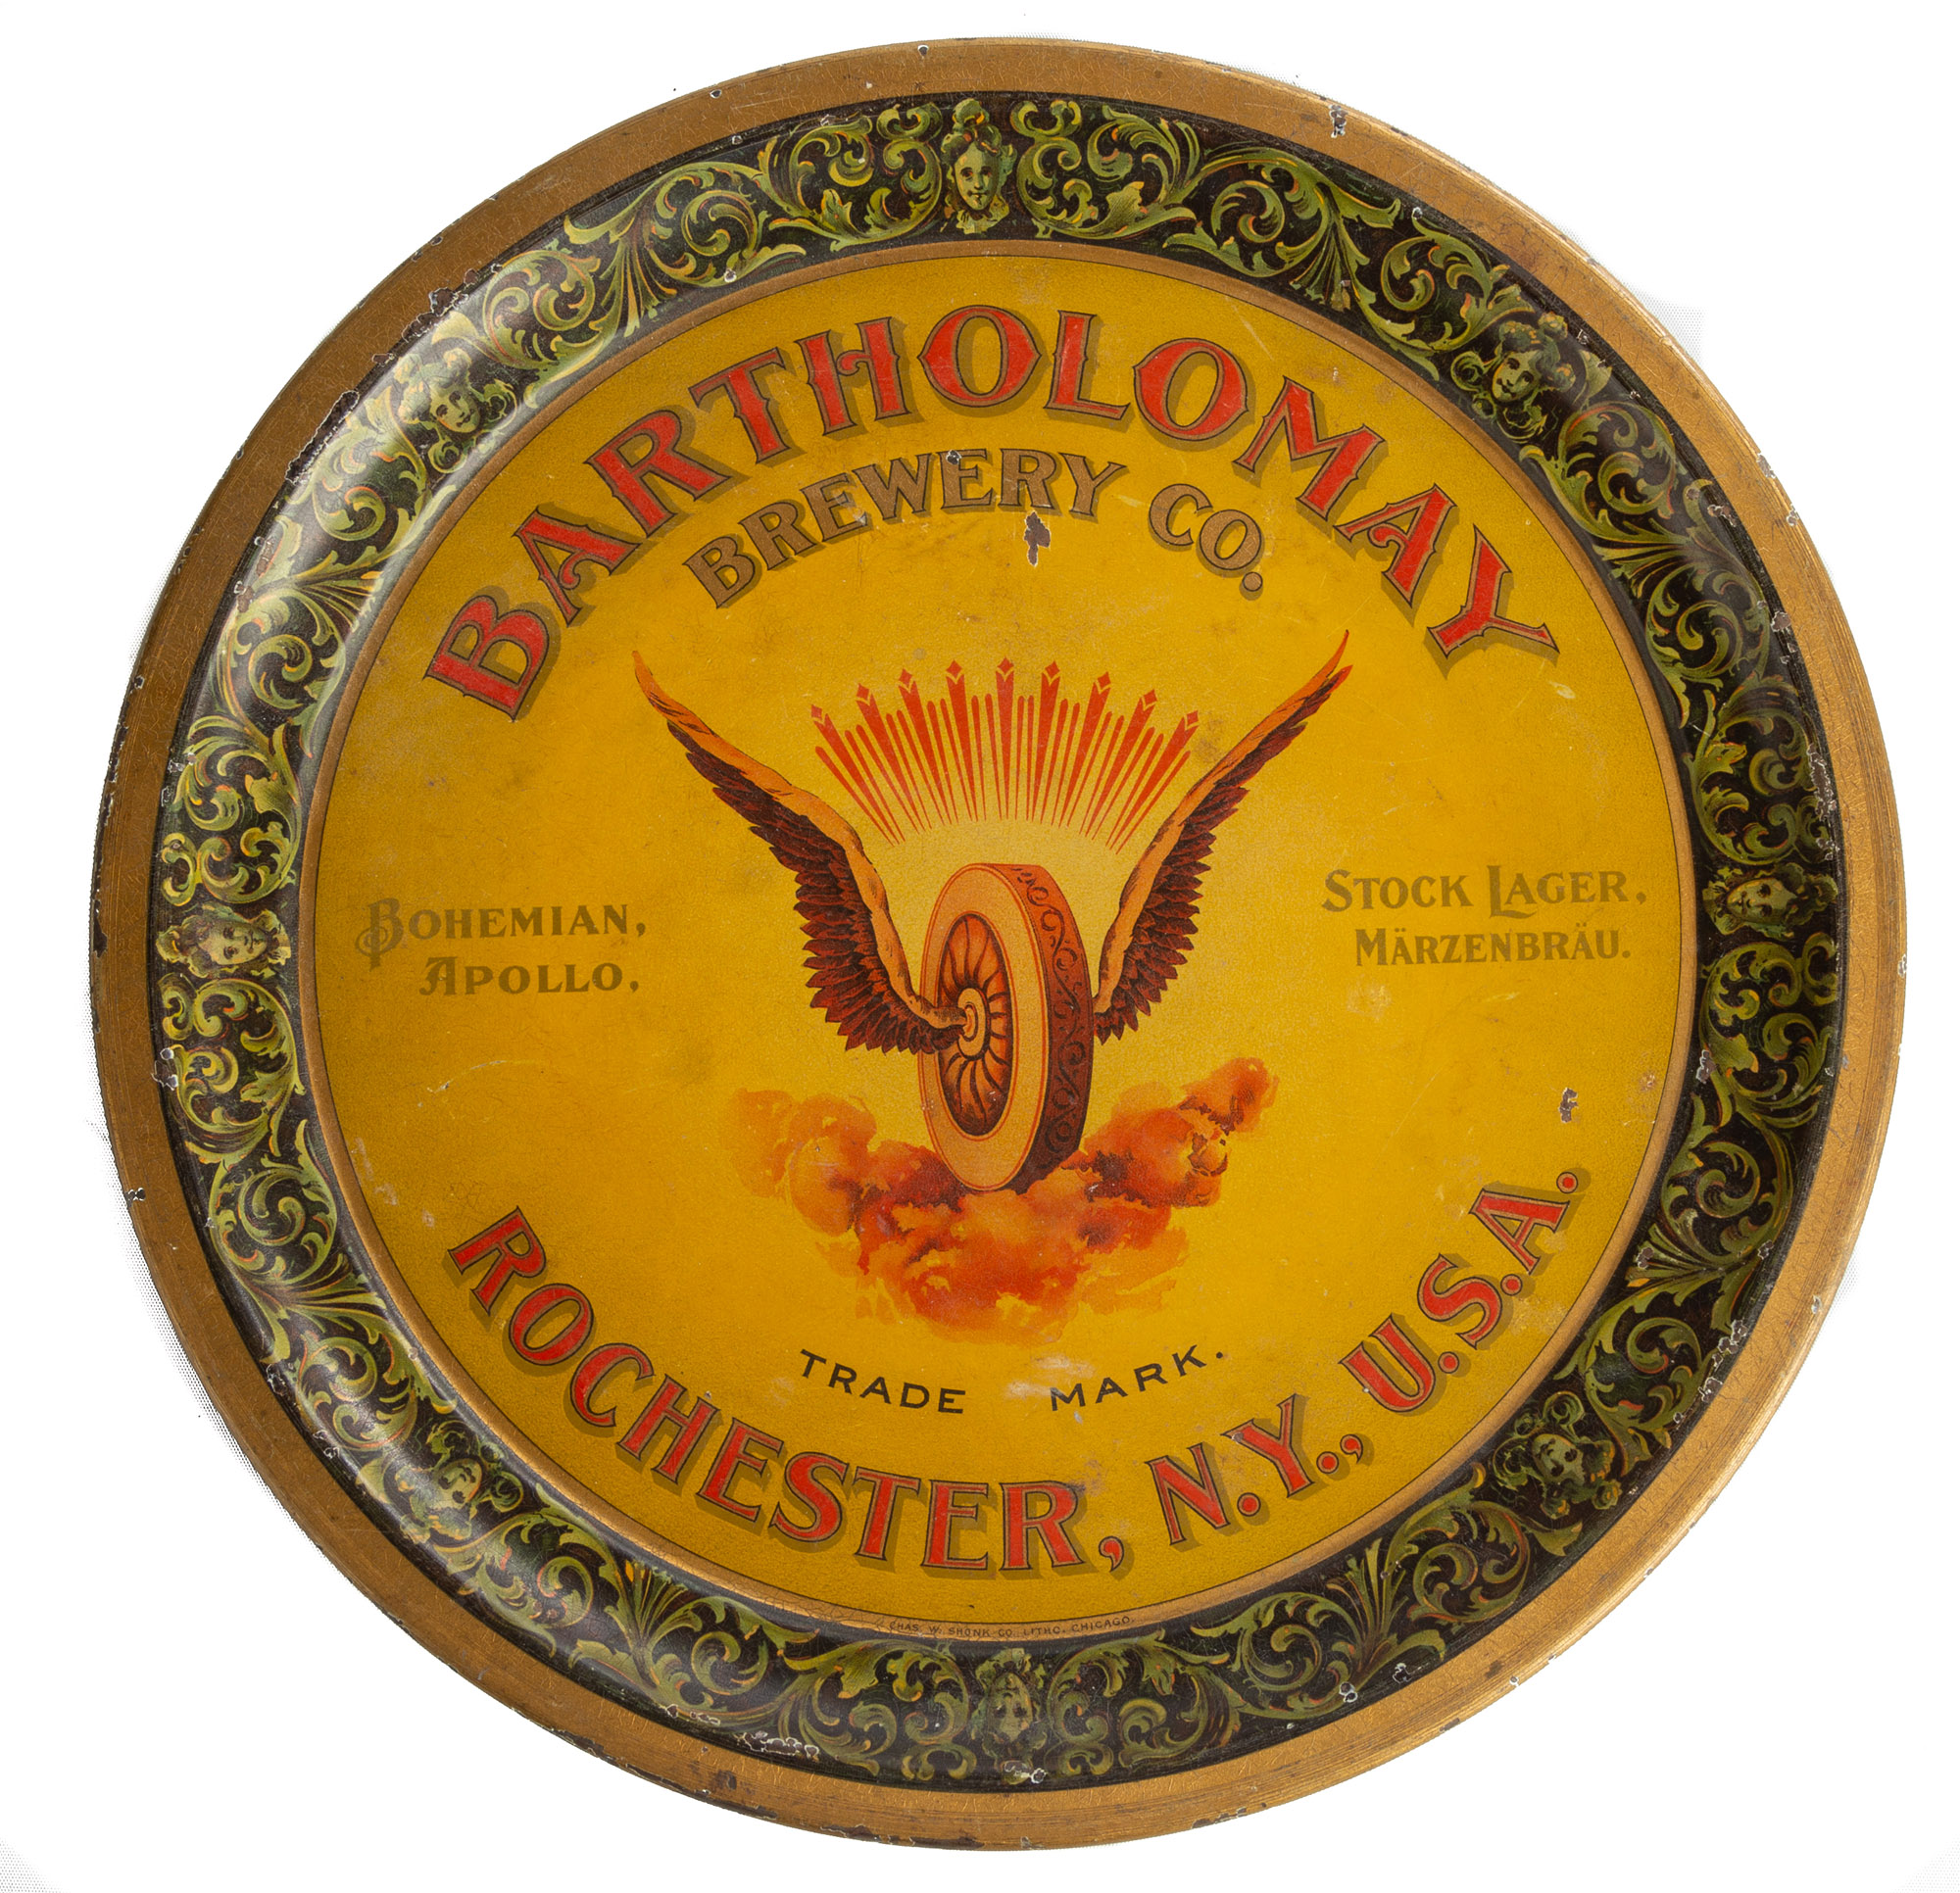 BARTHOLOMAY BREWERY CO., ROCHESTER,